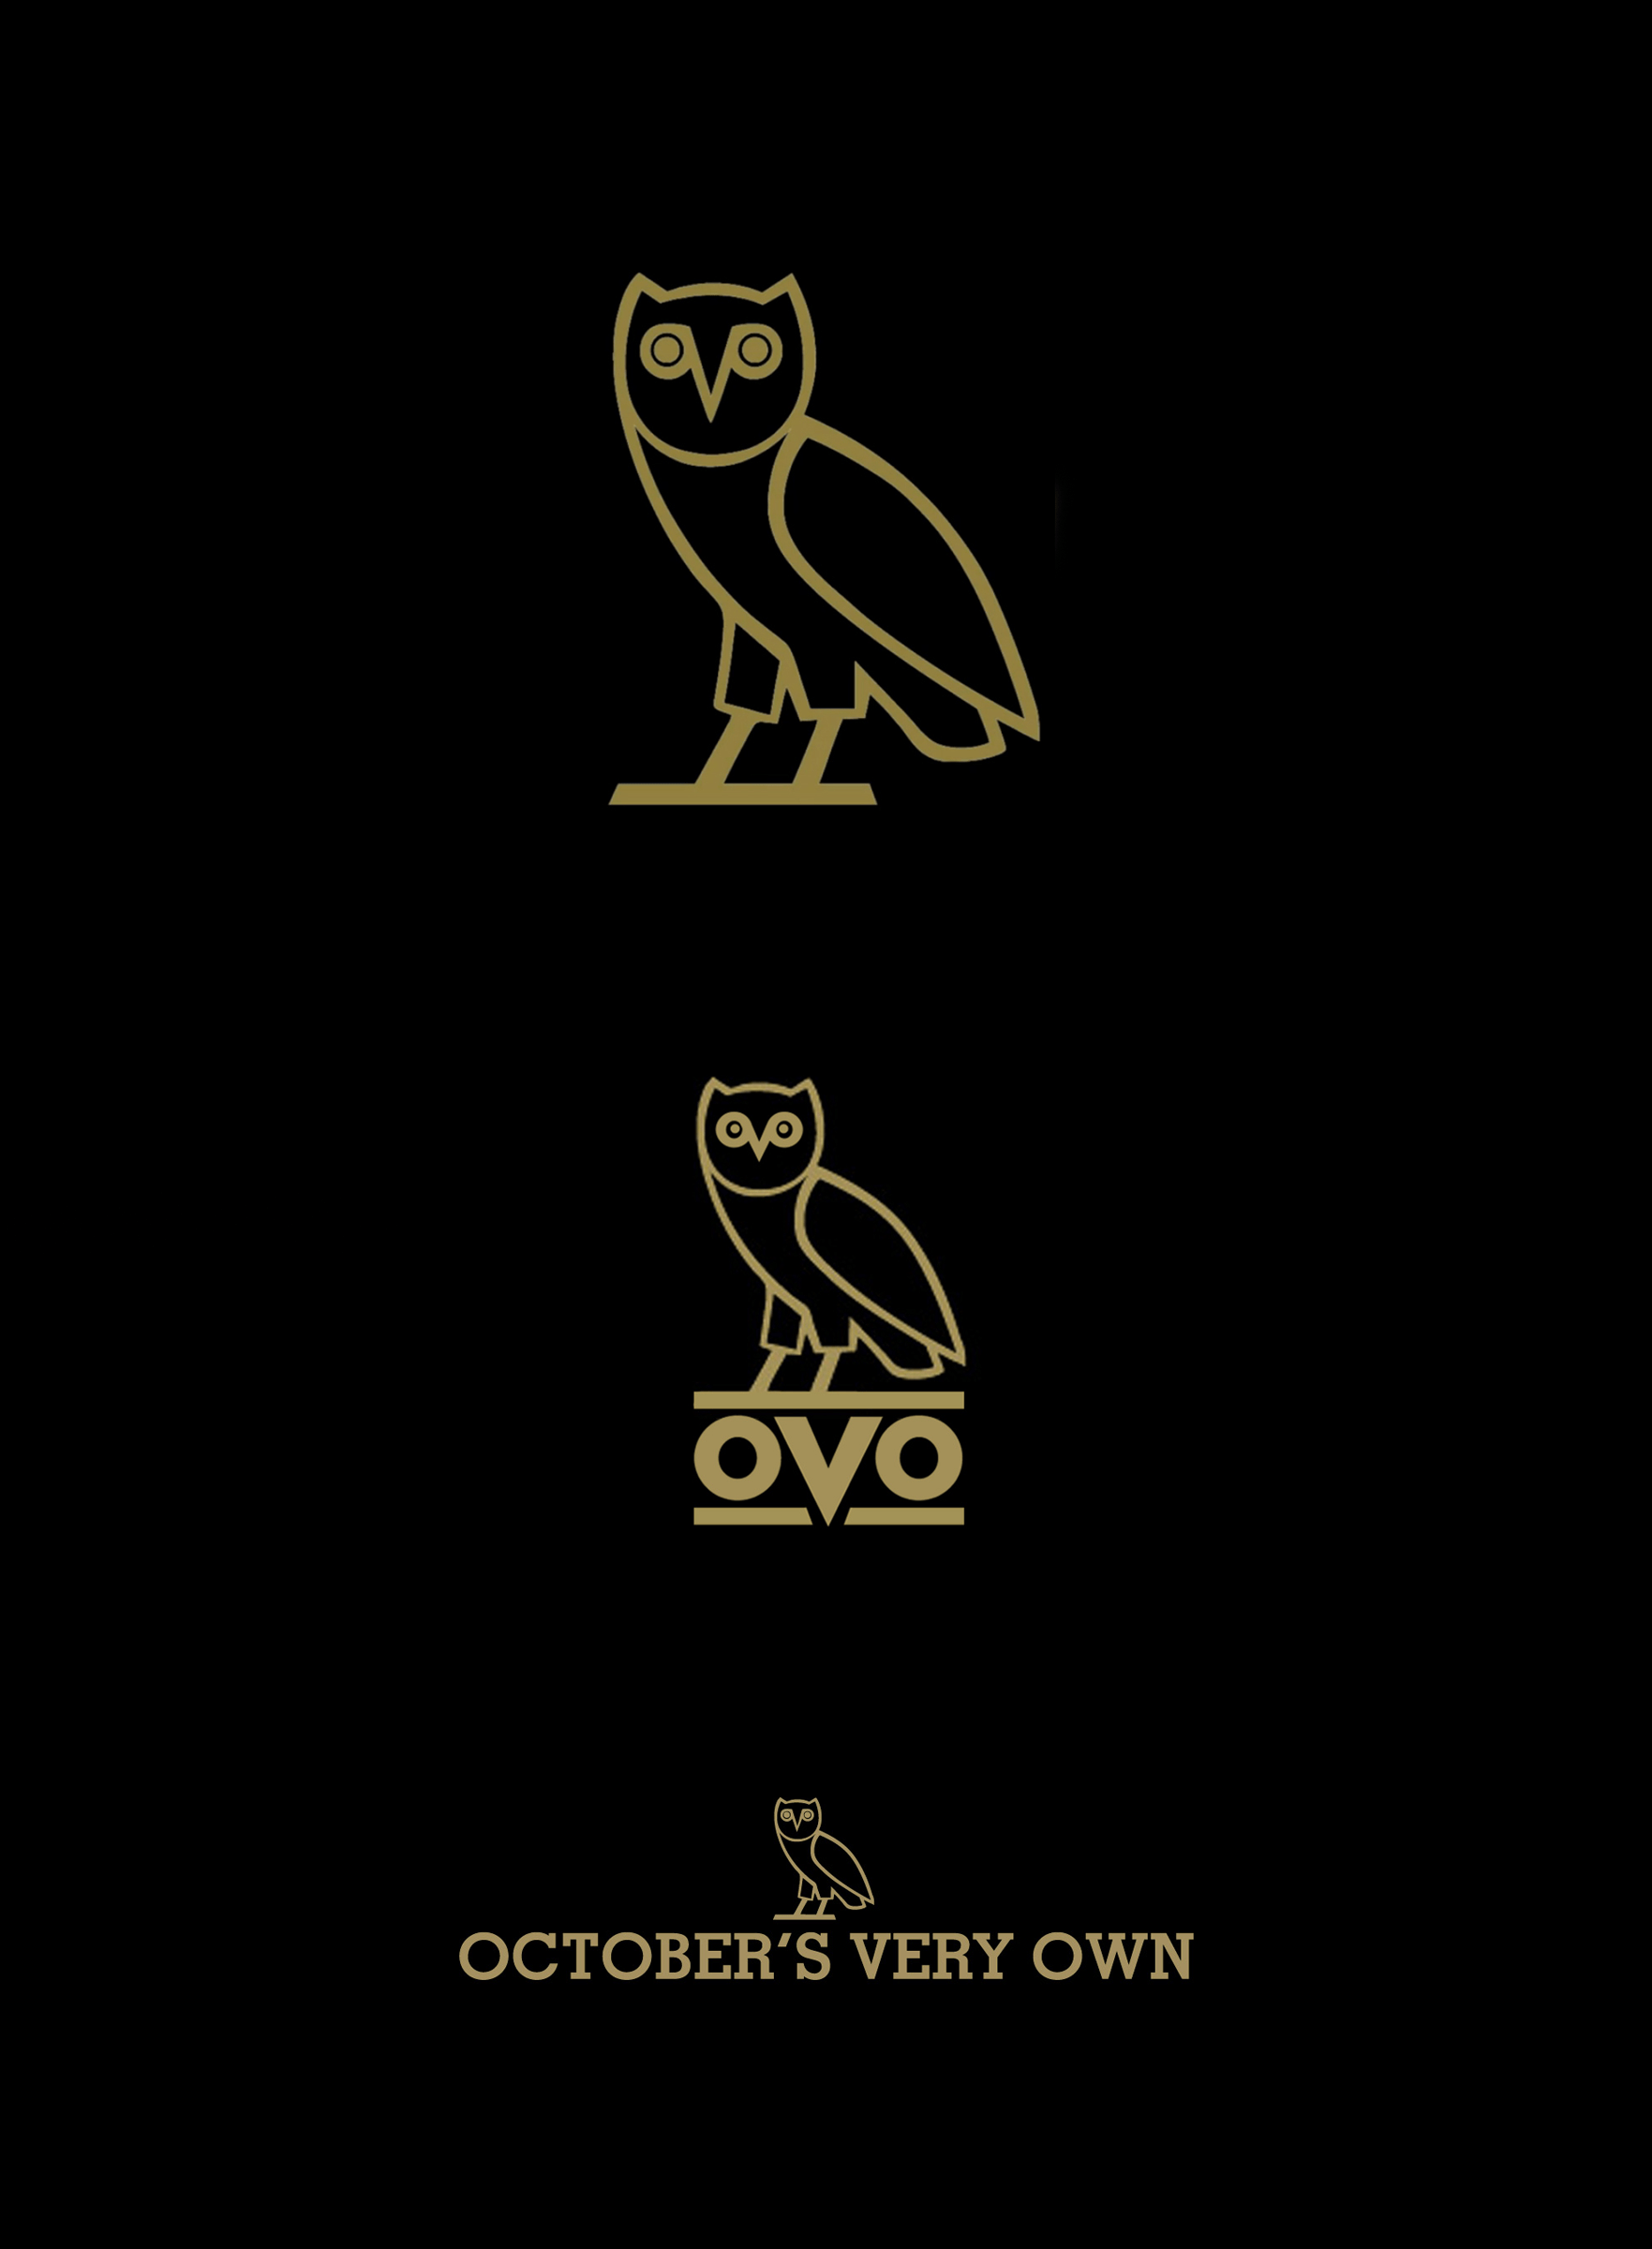 Clothing Line Logo - OVO logo and wordmark for Drake's made in Canada clothing line ...